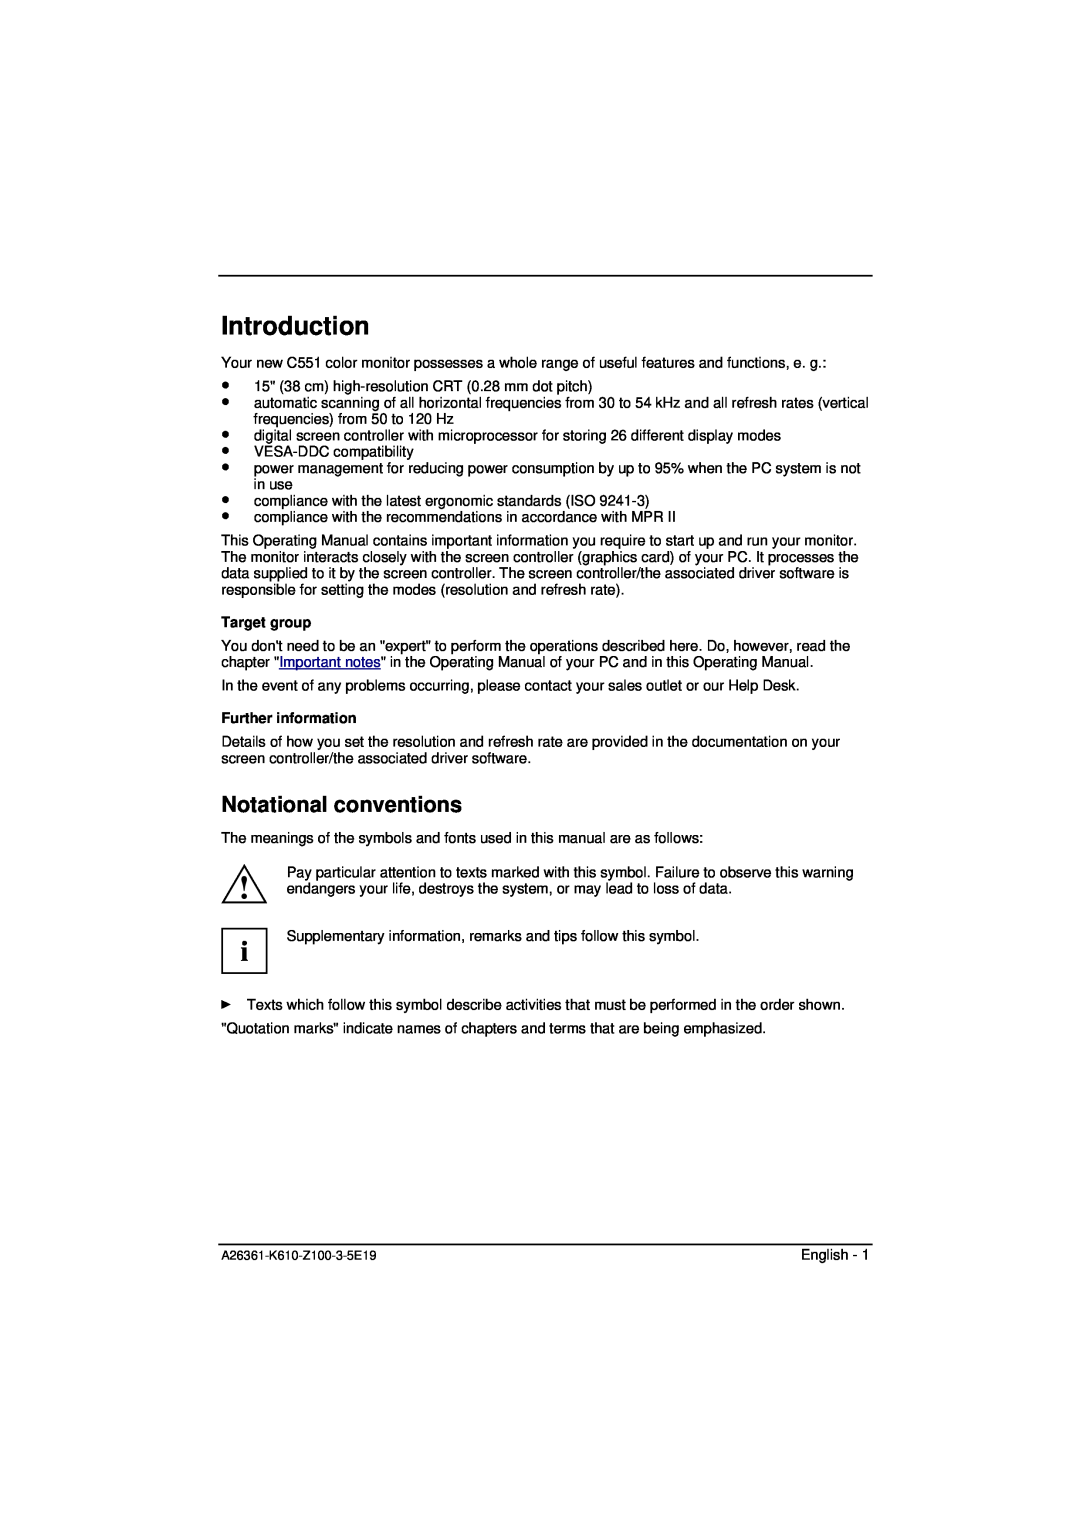 Fujitsu Siemens Computers C551 manual Introduction, Notational conventions, Target group, Further information 